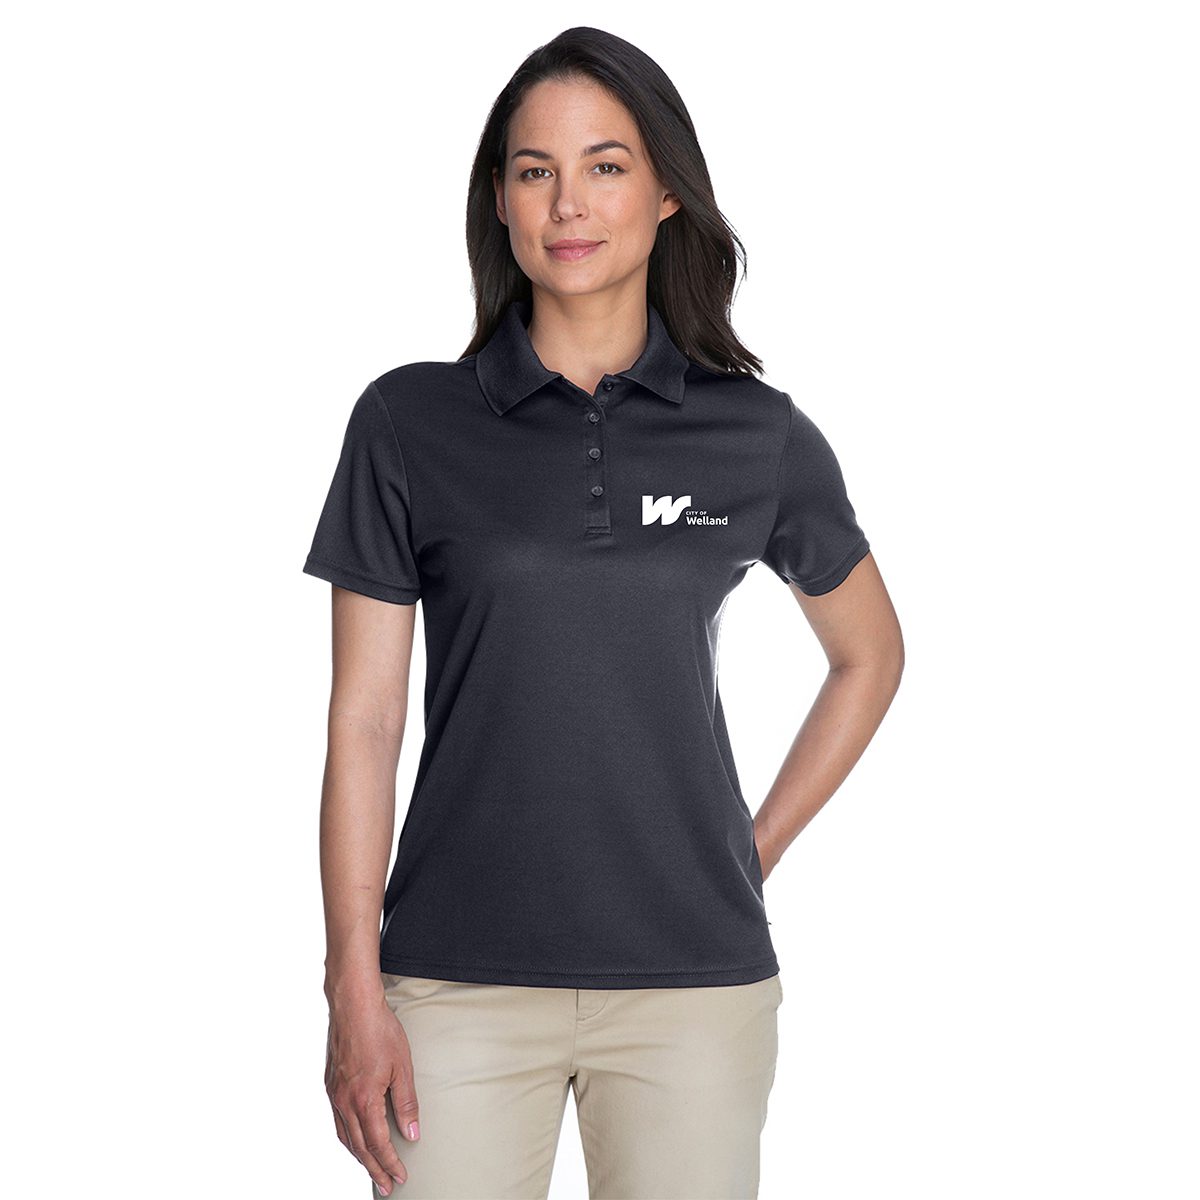 City-of-Welland-Merch-Store_V7-78181-Carbon-Front-White-Welland-Logo